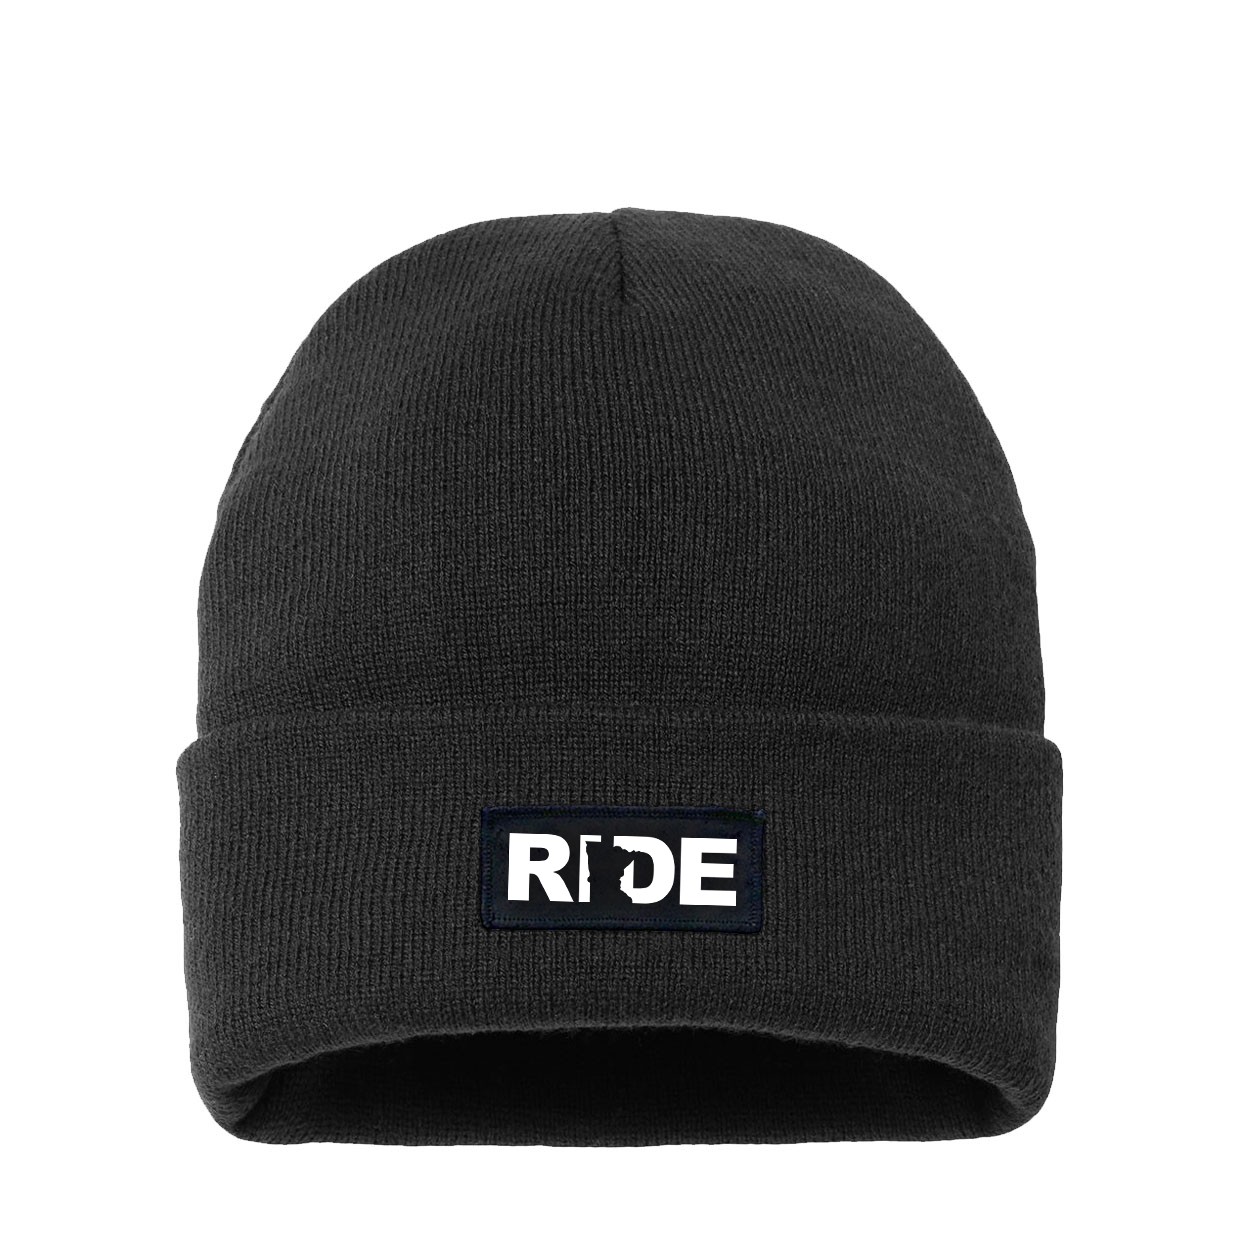 Ride Minnesota Night Out Woven Patch Night Out Sherpa Lined Cuffed Beanie Black (White Logo)